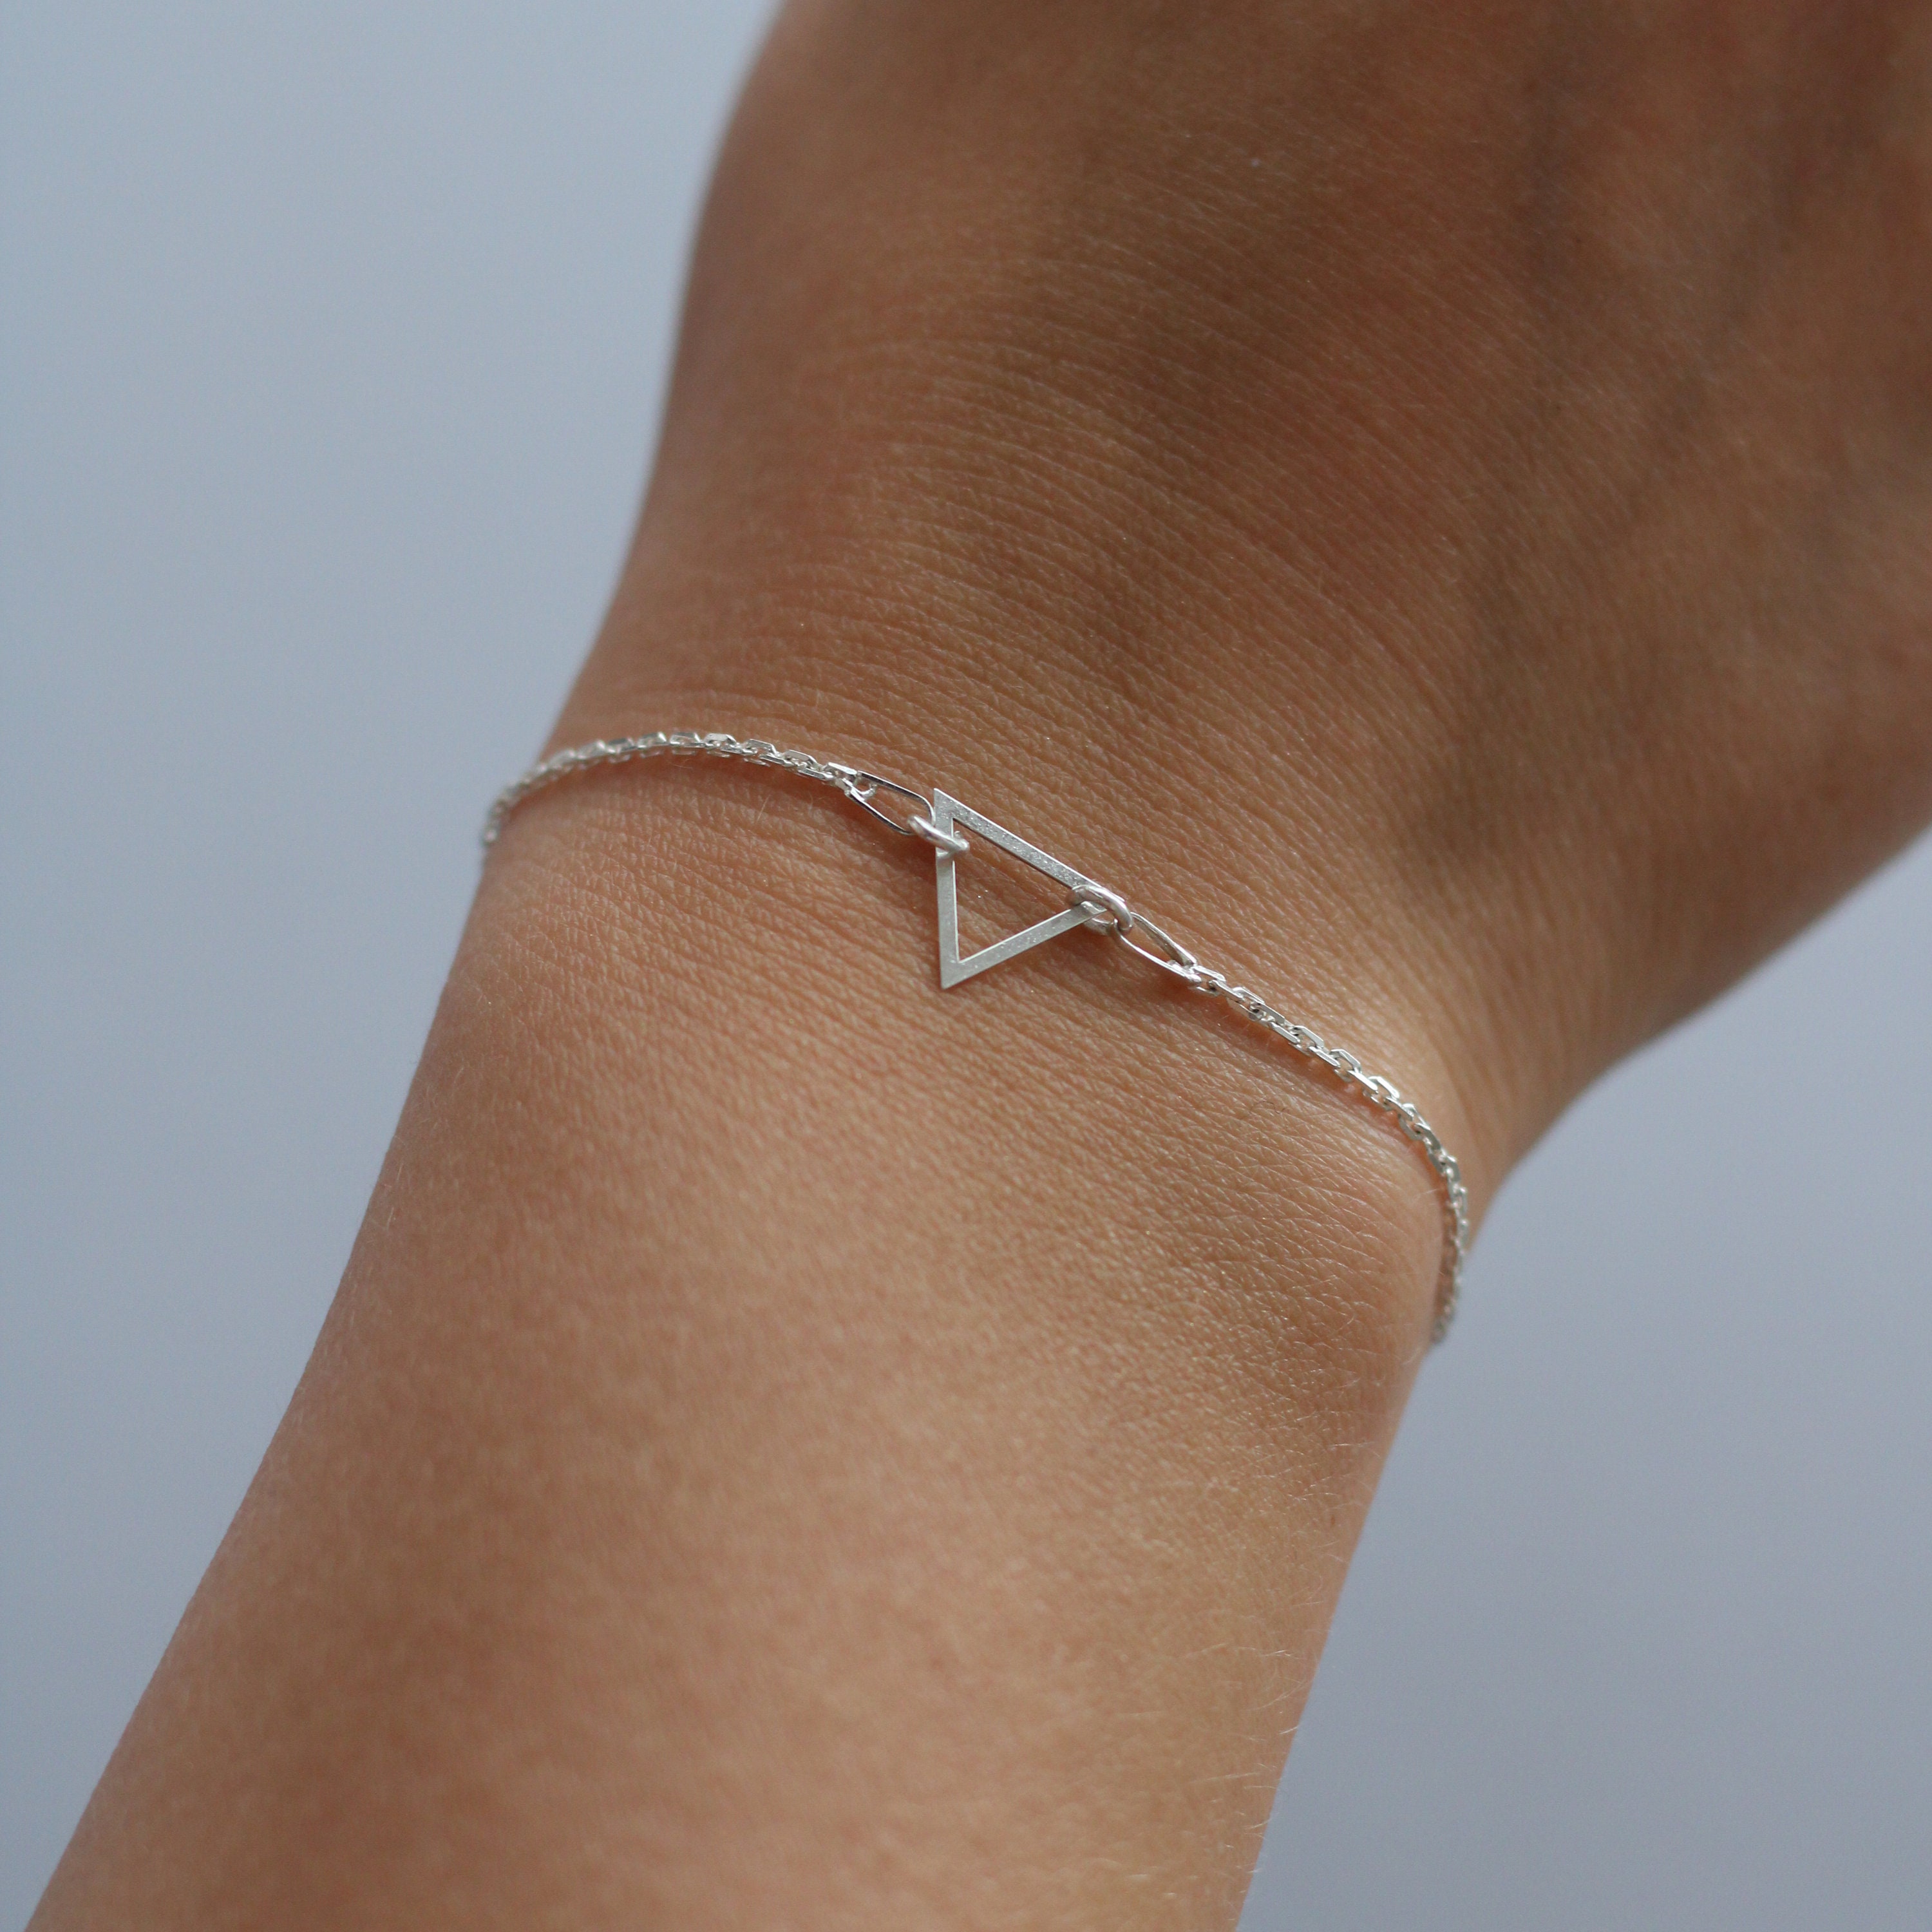 14K Solid Gold Triangle Charm Bracelet, 14K Gold Bracelet, Dainty Chain  Bracelet, Geometric Bracelet, Triangle Jewelry, Gift for Women - Etsy